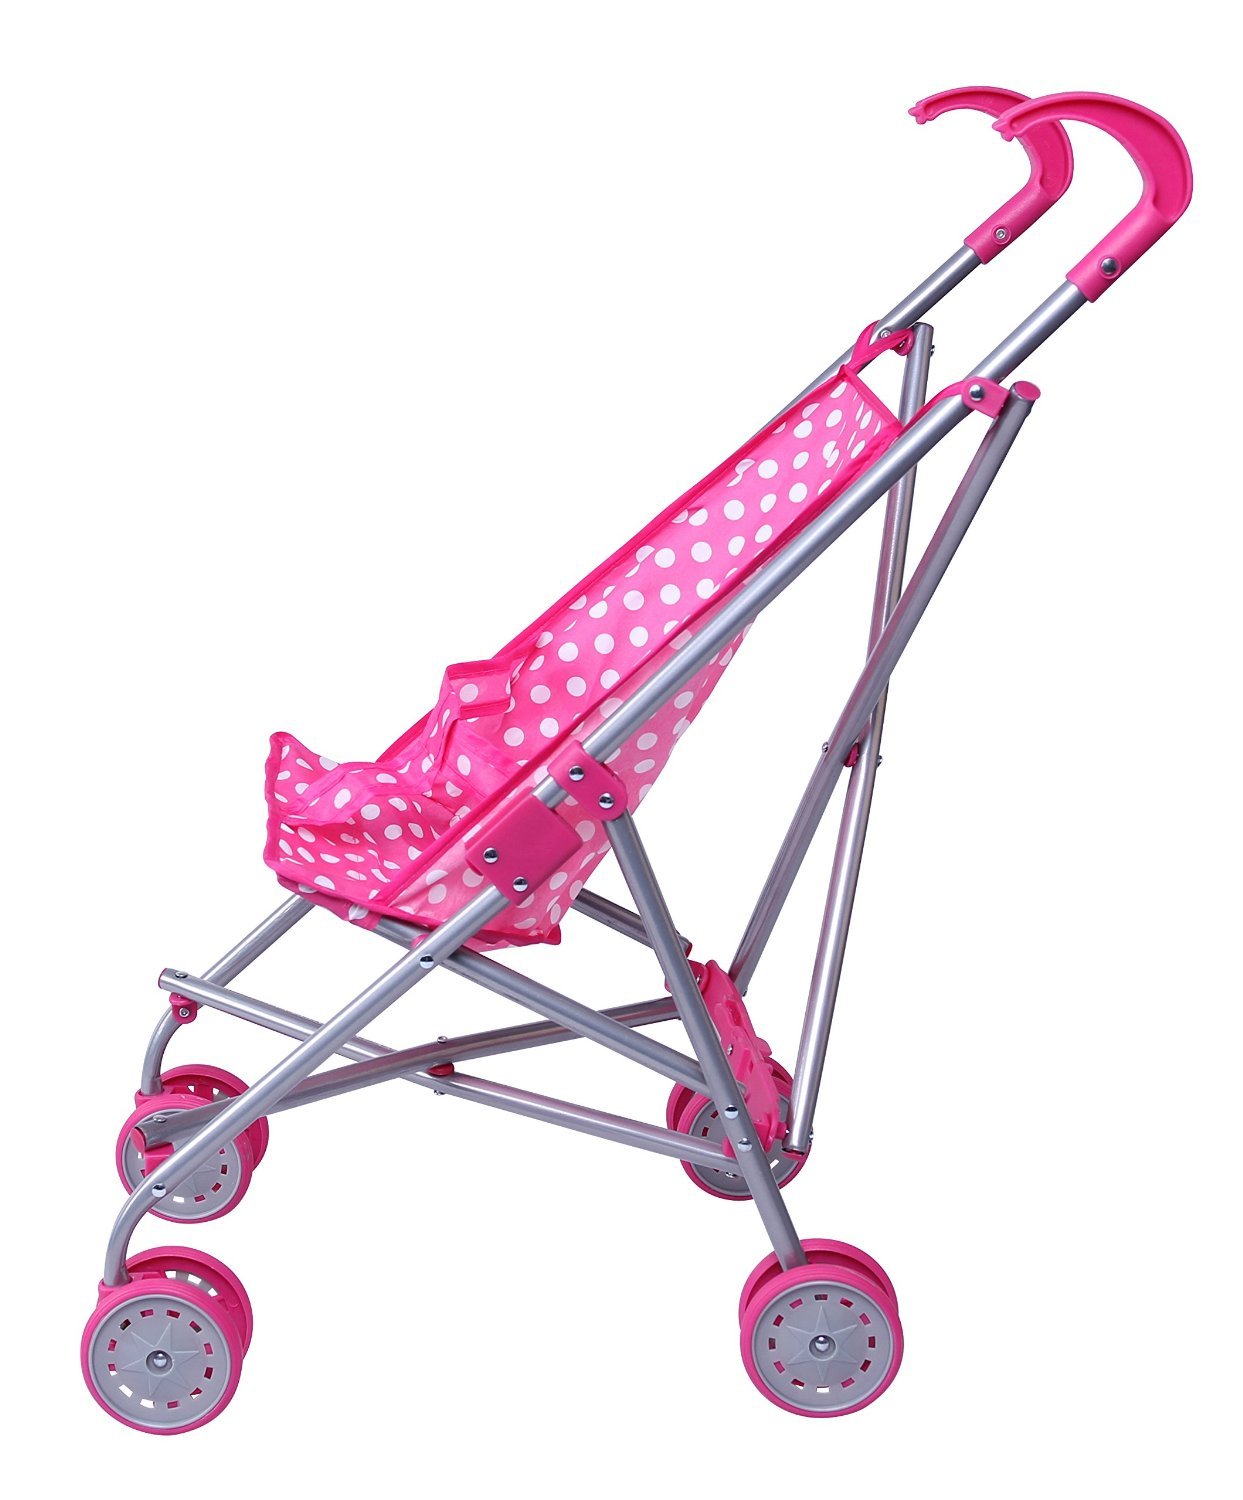 Precious Toys Baby Doll Stroller, Foldable Play Stroller, Fits Dolls 18 Inches, Extra Stability, Fully Assembled, Color Pink and White Polka Dots, Lead Free Paint, Gifts for Toddlers and Girls Ages 2+